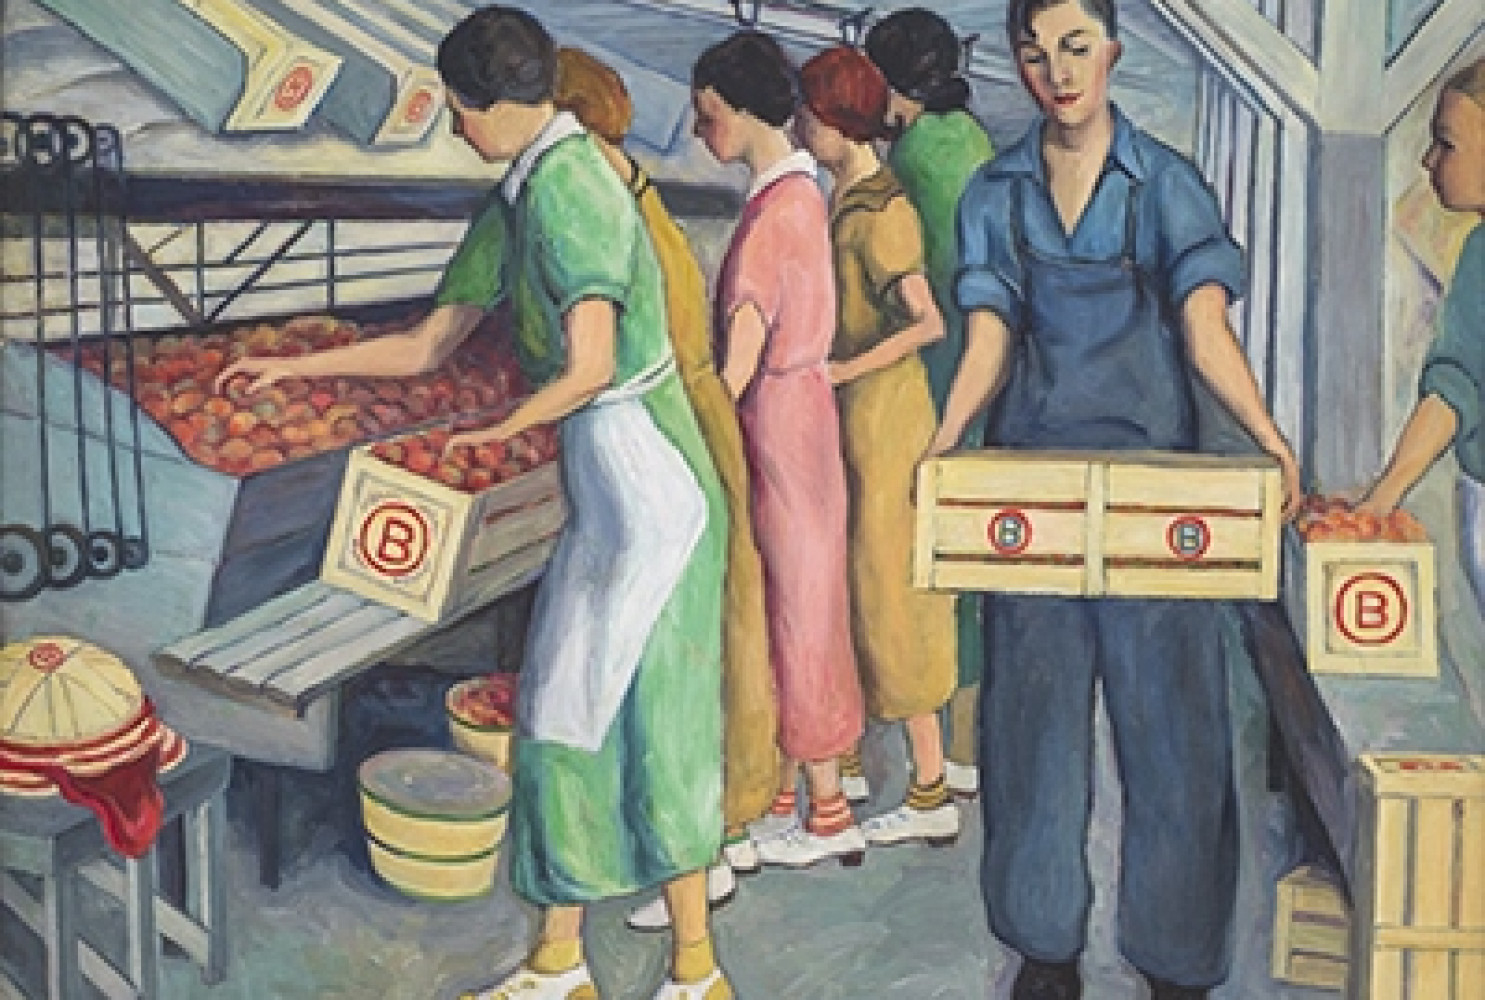 Peach Packing, Spartanburg County, 1938, By Wenonah Day Bell (American, 1890 - 1981); Oil on canvas; 38 x 48 inches; 2010.05.04; The Johnson Collection, Spartanburg, South Carolina